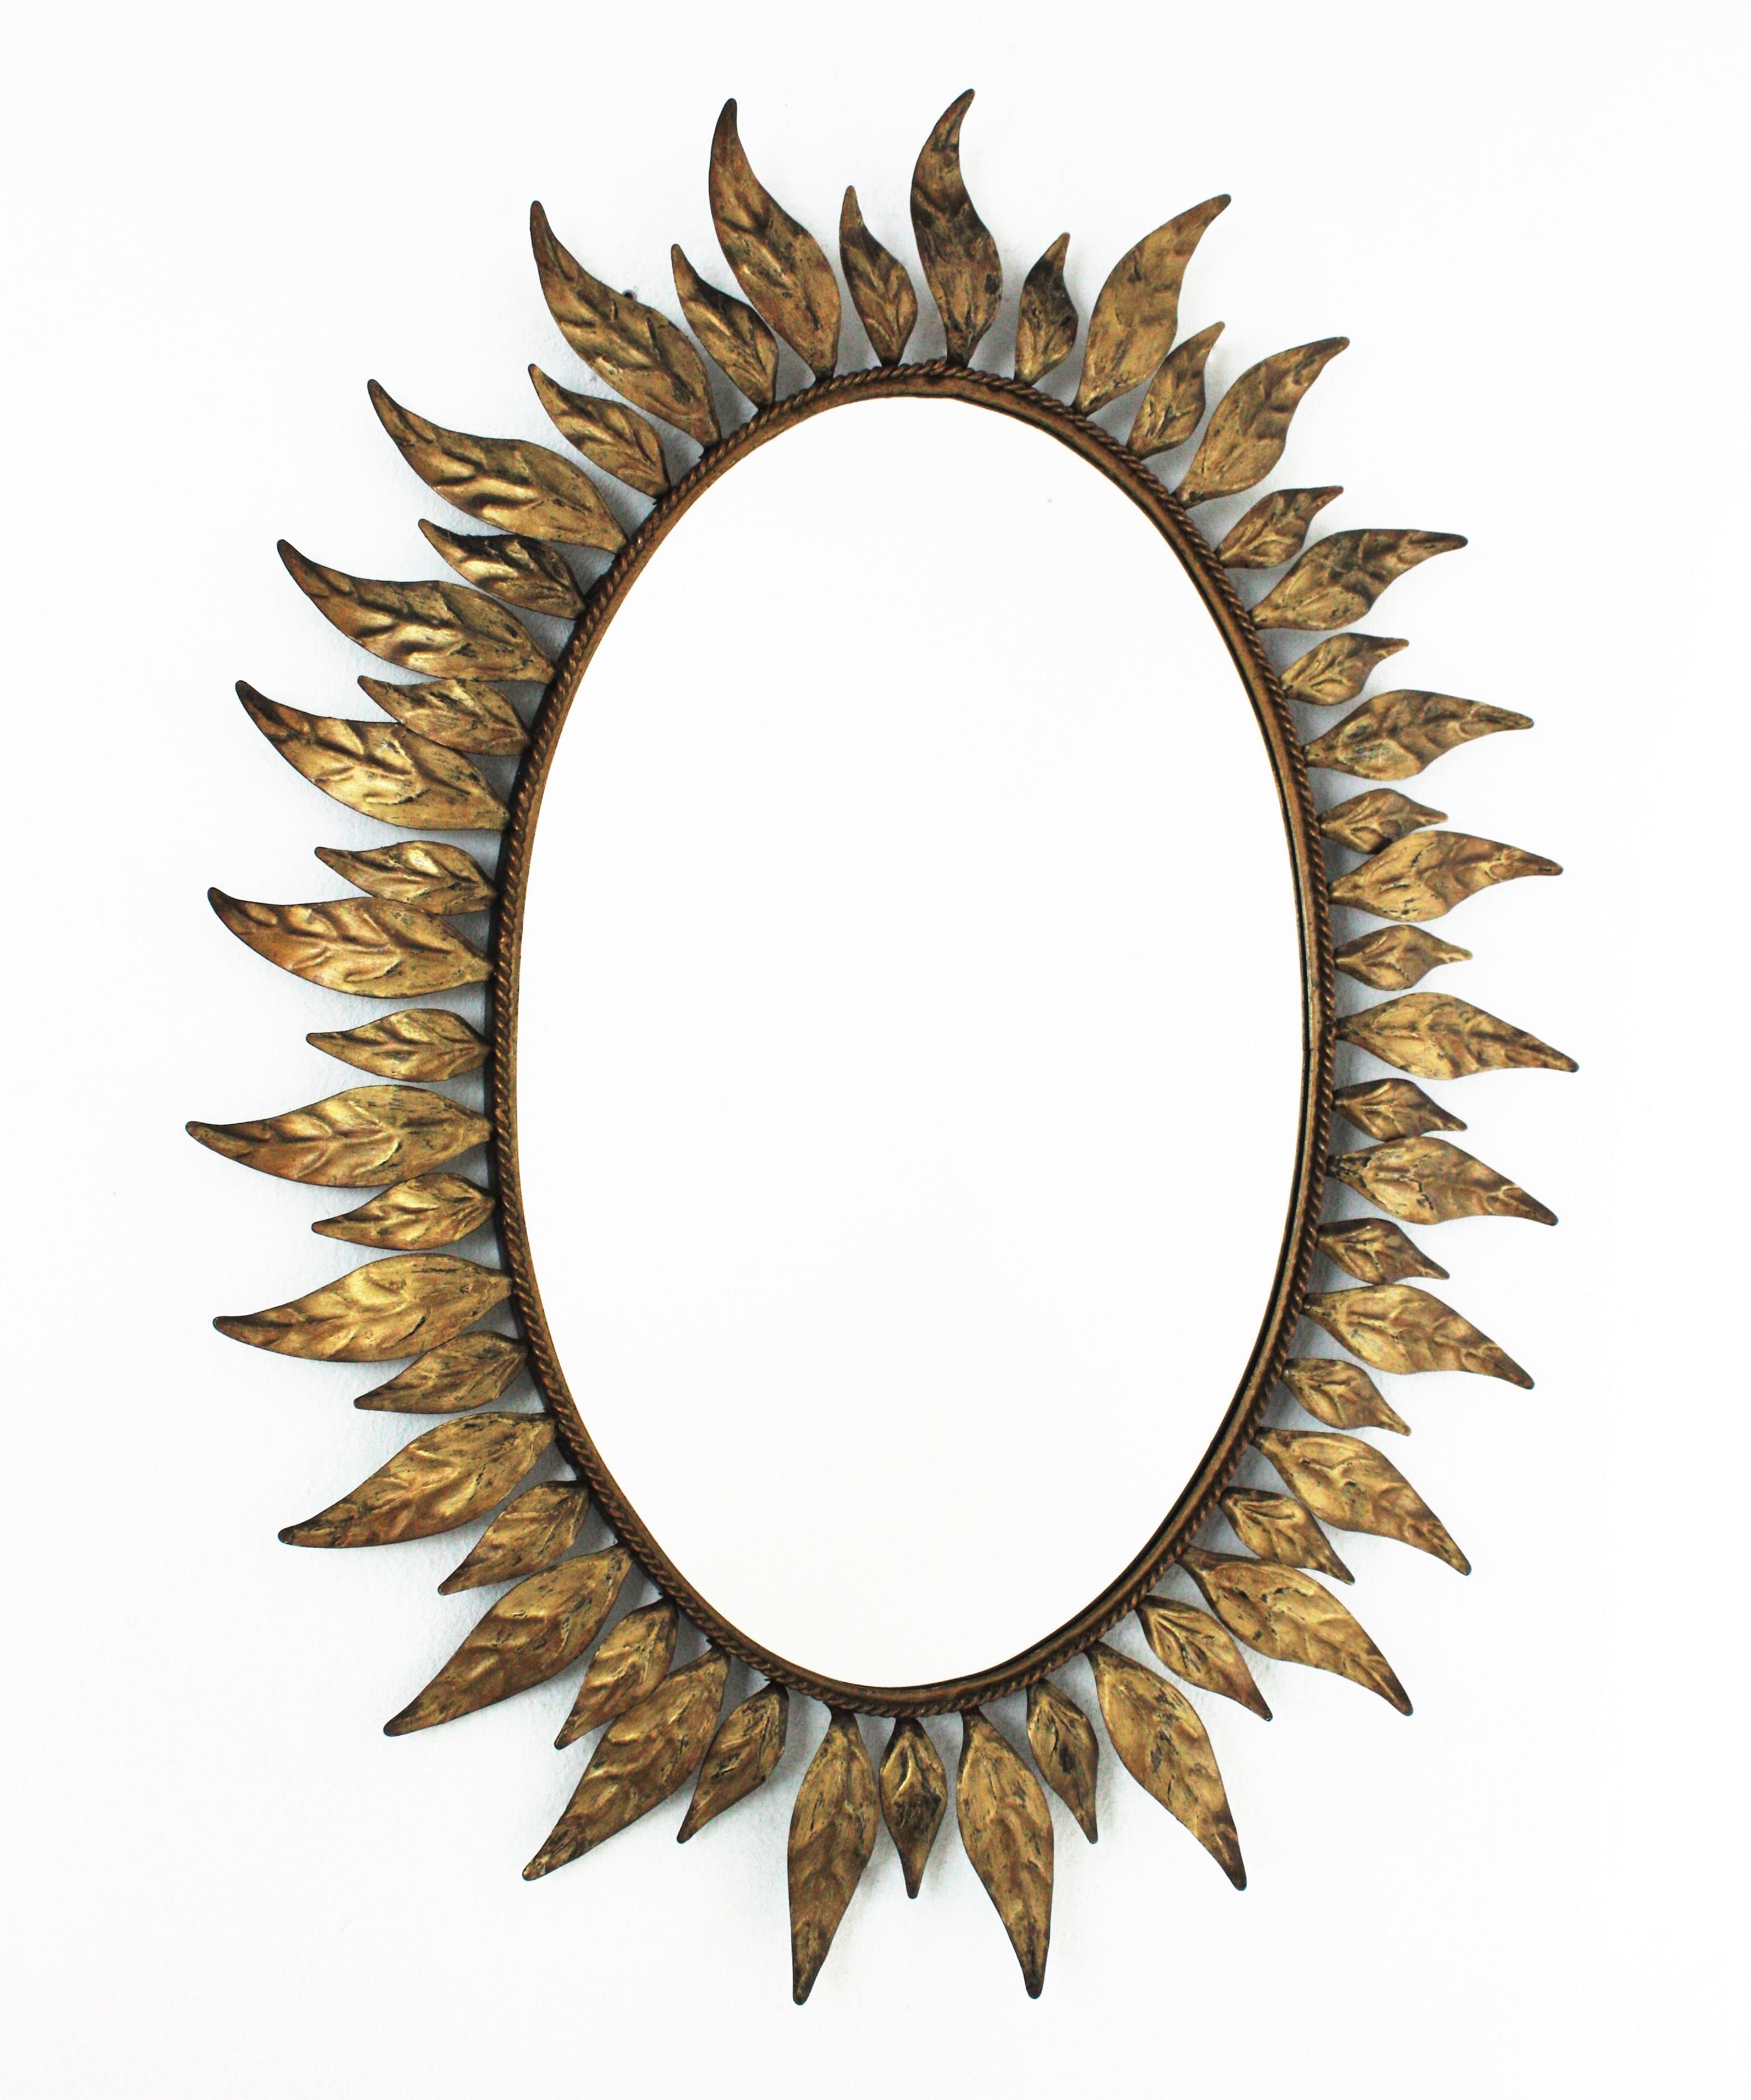 Gilt metal sunburst mirror framed with leaves in bronze, parcel-gilt color. Spain, 1950s-1960s.
A highly decorative oval sunburst mirror framed with elegant curved leaves in two sizes.
This mirror is in excellent vintage condition and has a